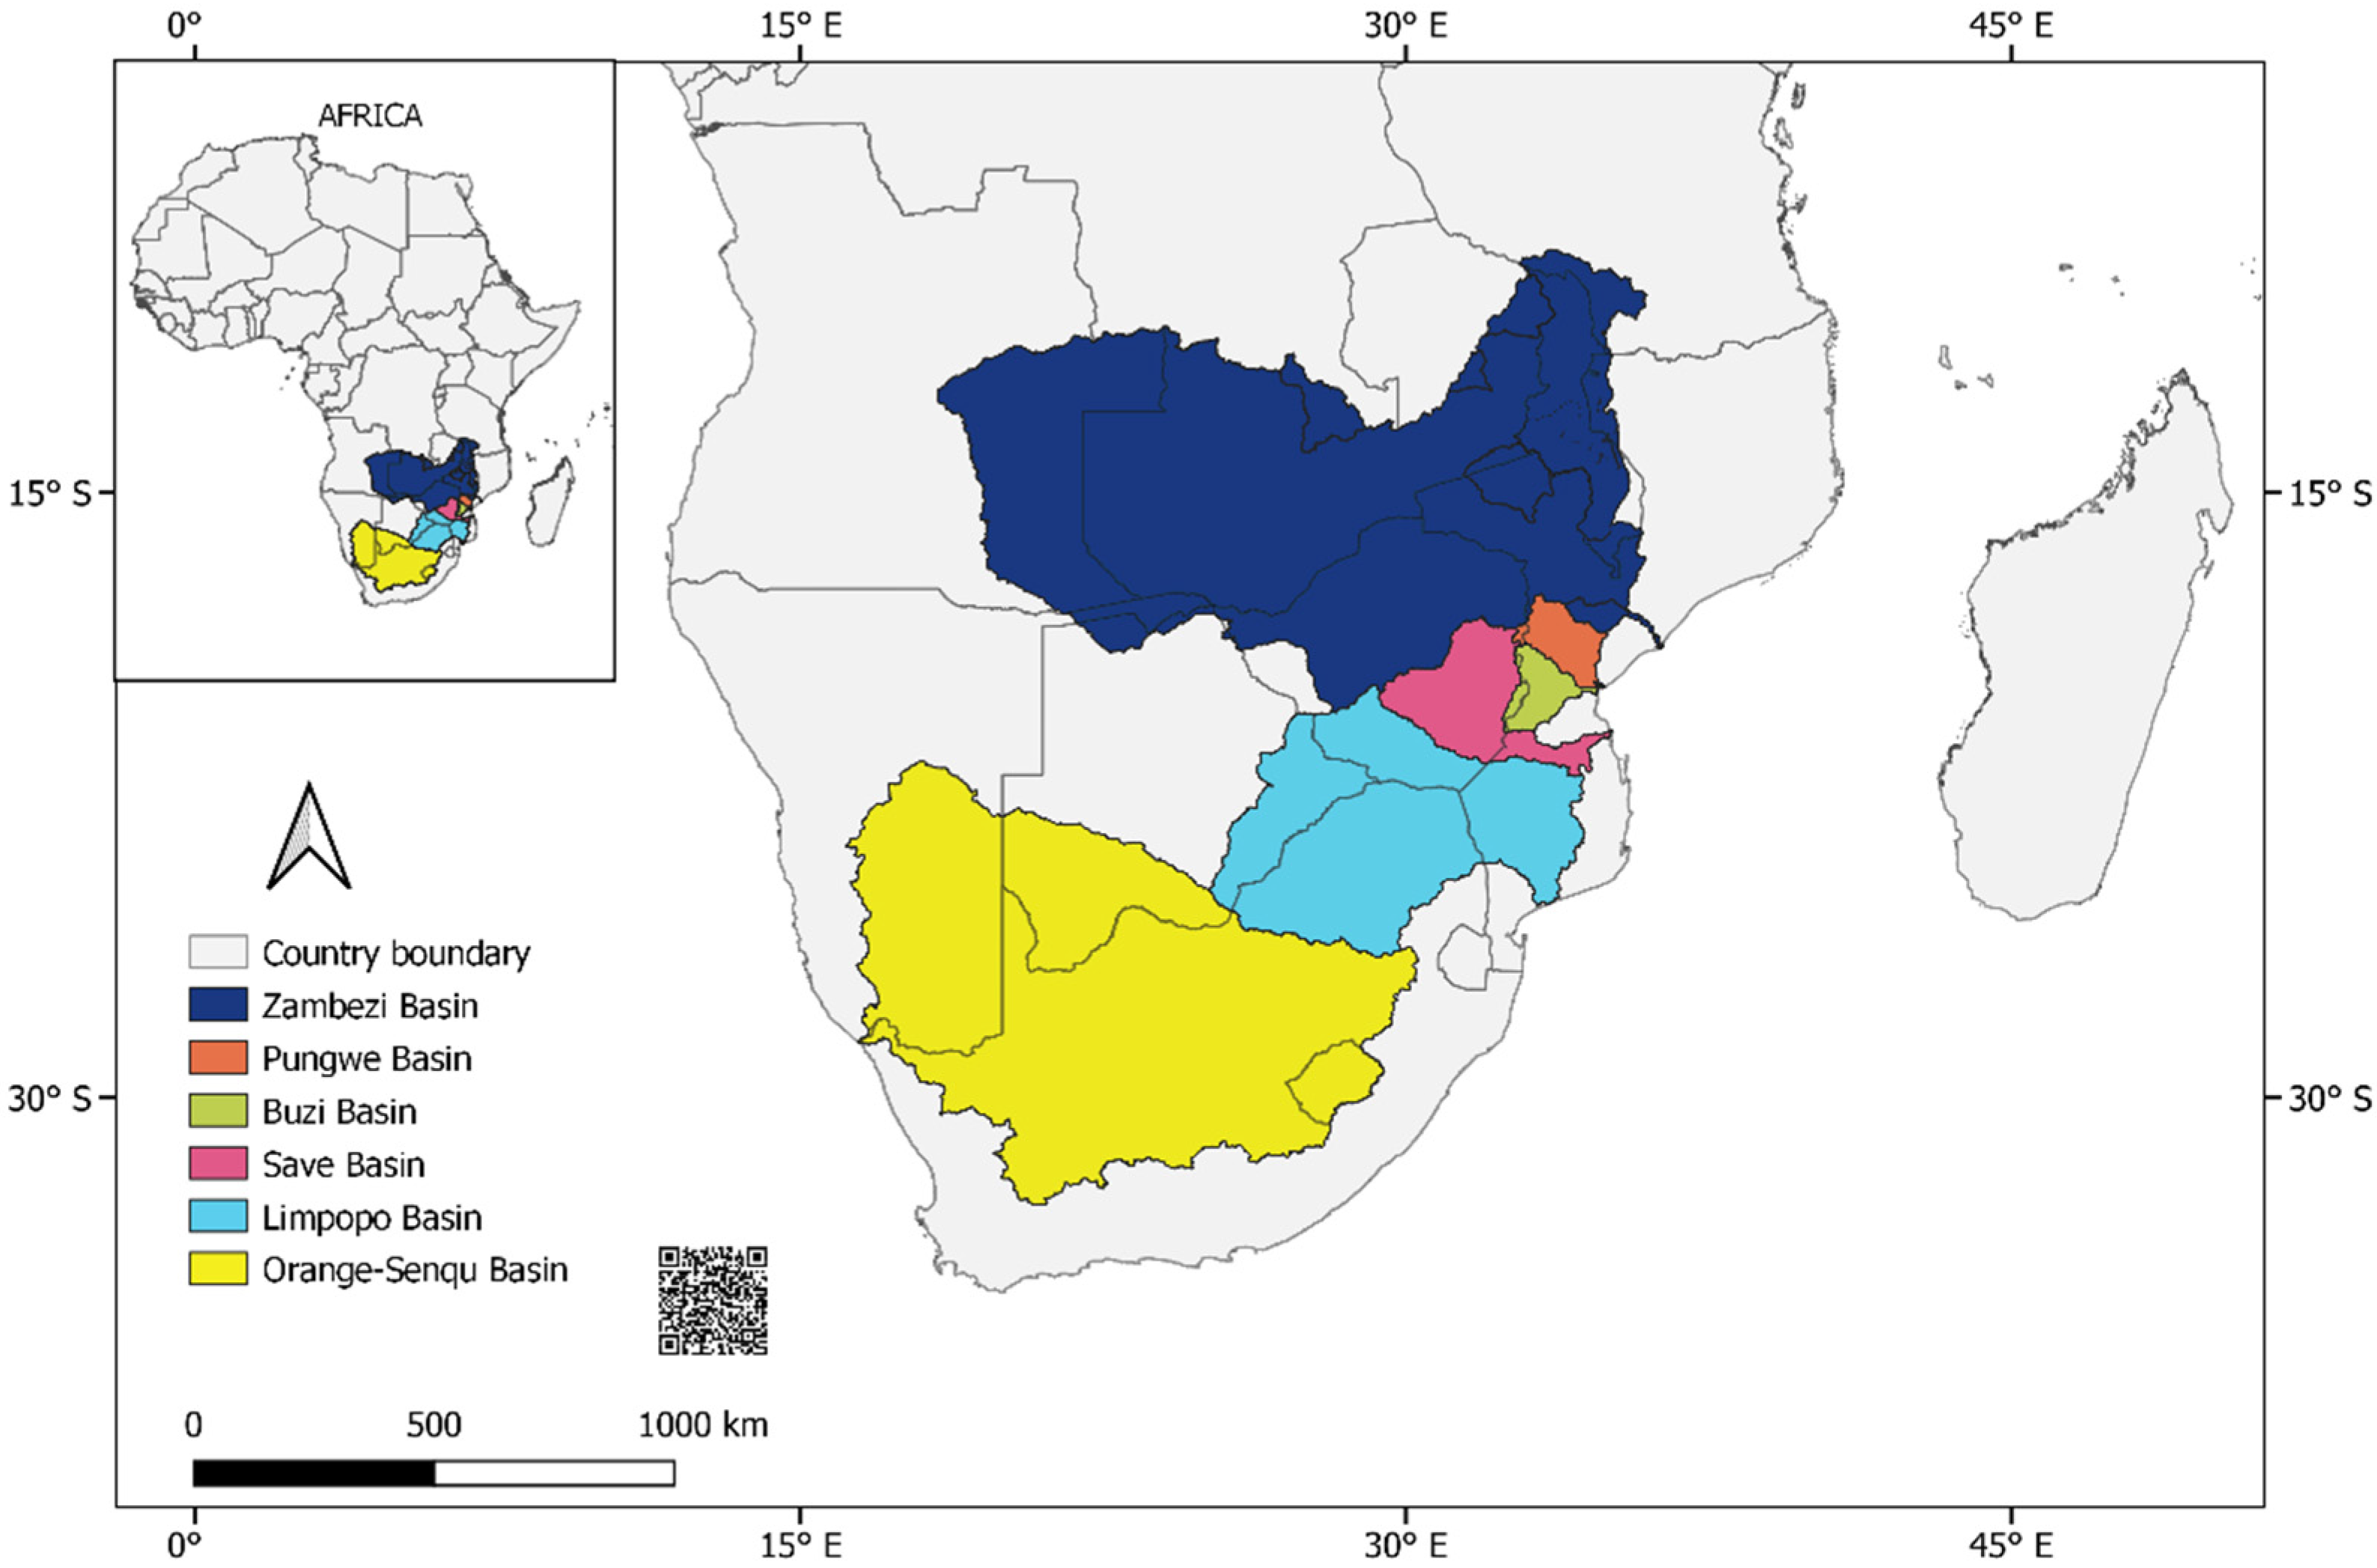 Minerals | Free Full-Text | Aquatic Ecological Risk of Heavy-Metal  Pollution Associated with Degraded Mining Landscapes of the Southern Africa  River Basins: A Review | HTML